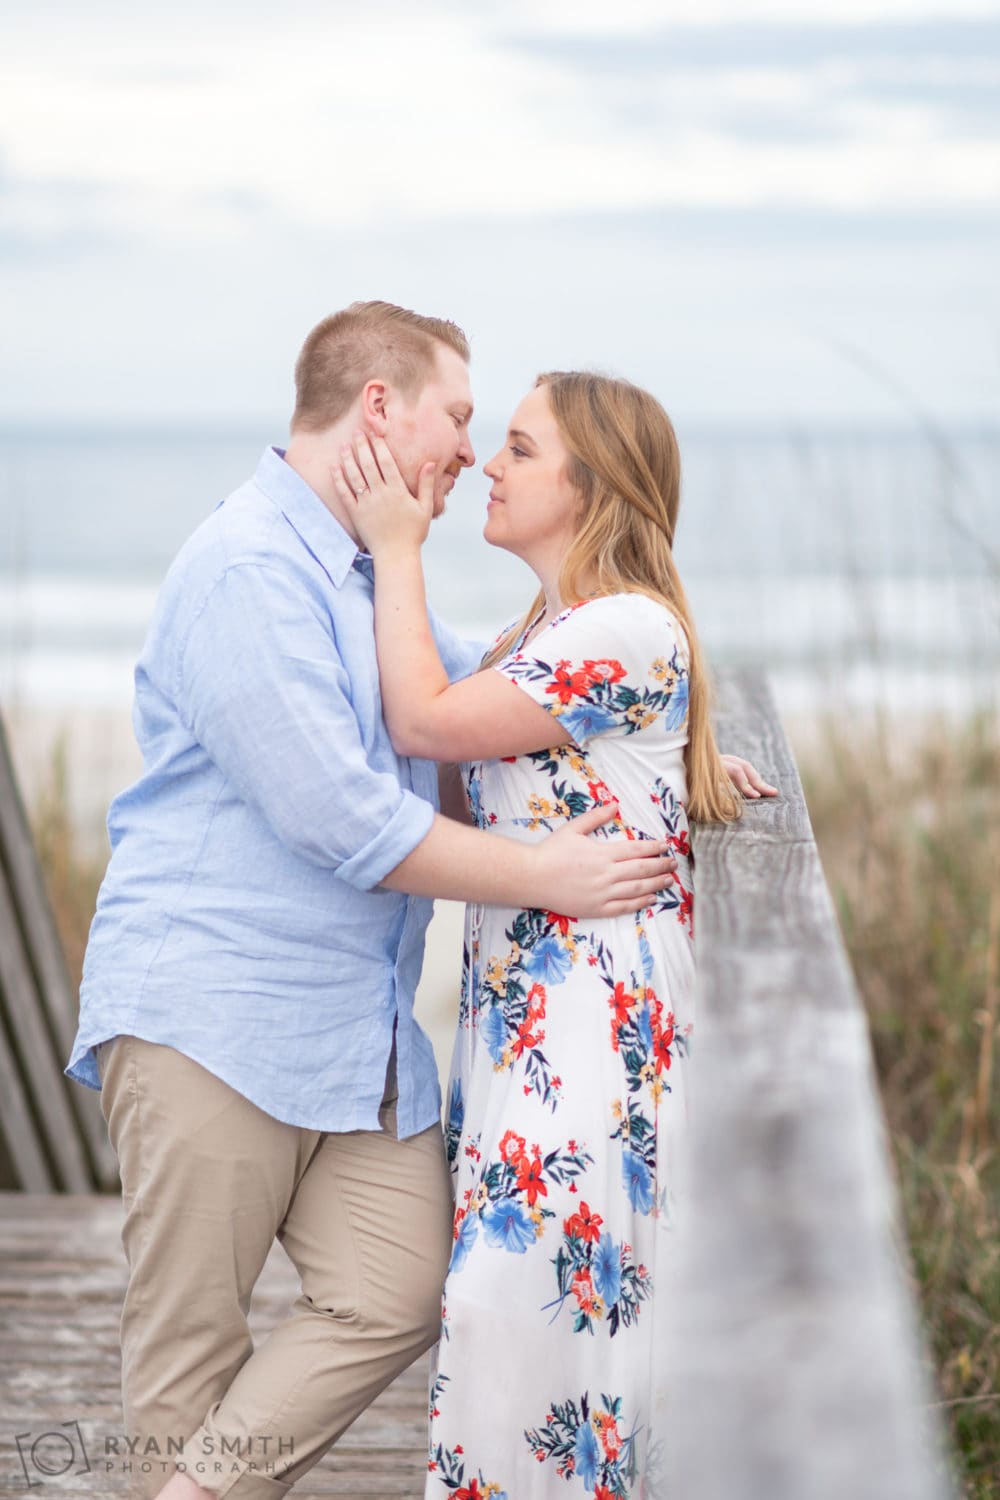 Beautiful winter sunset for engagement pictures - Huntington Beach State Park